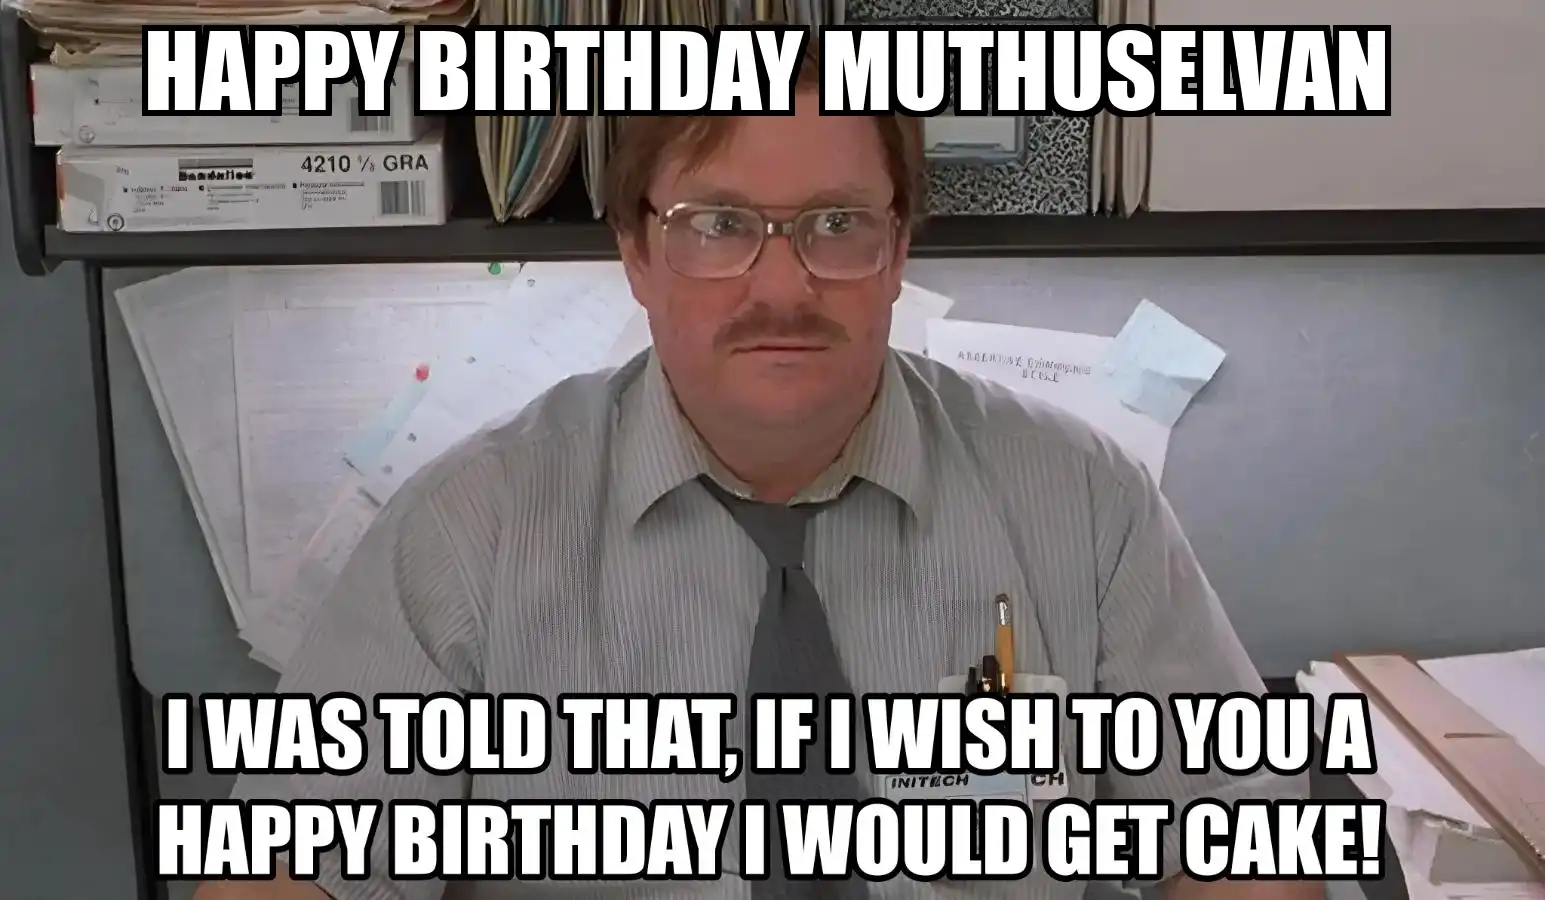 Happy Birthday Muthuselvan I Would Get A Cake Meme